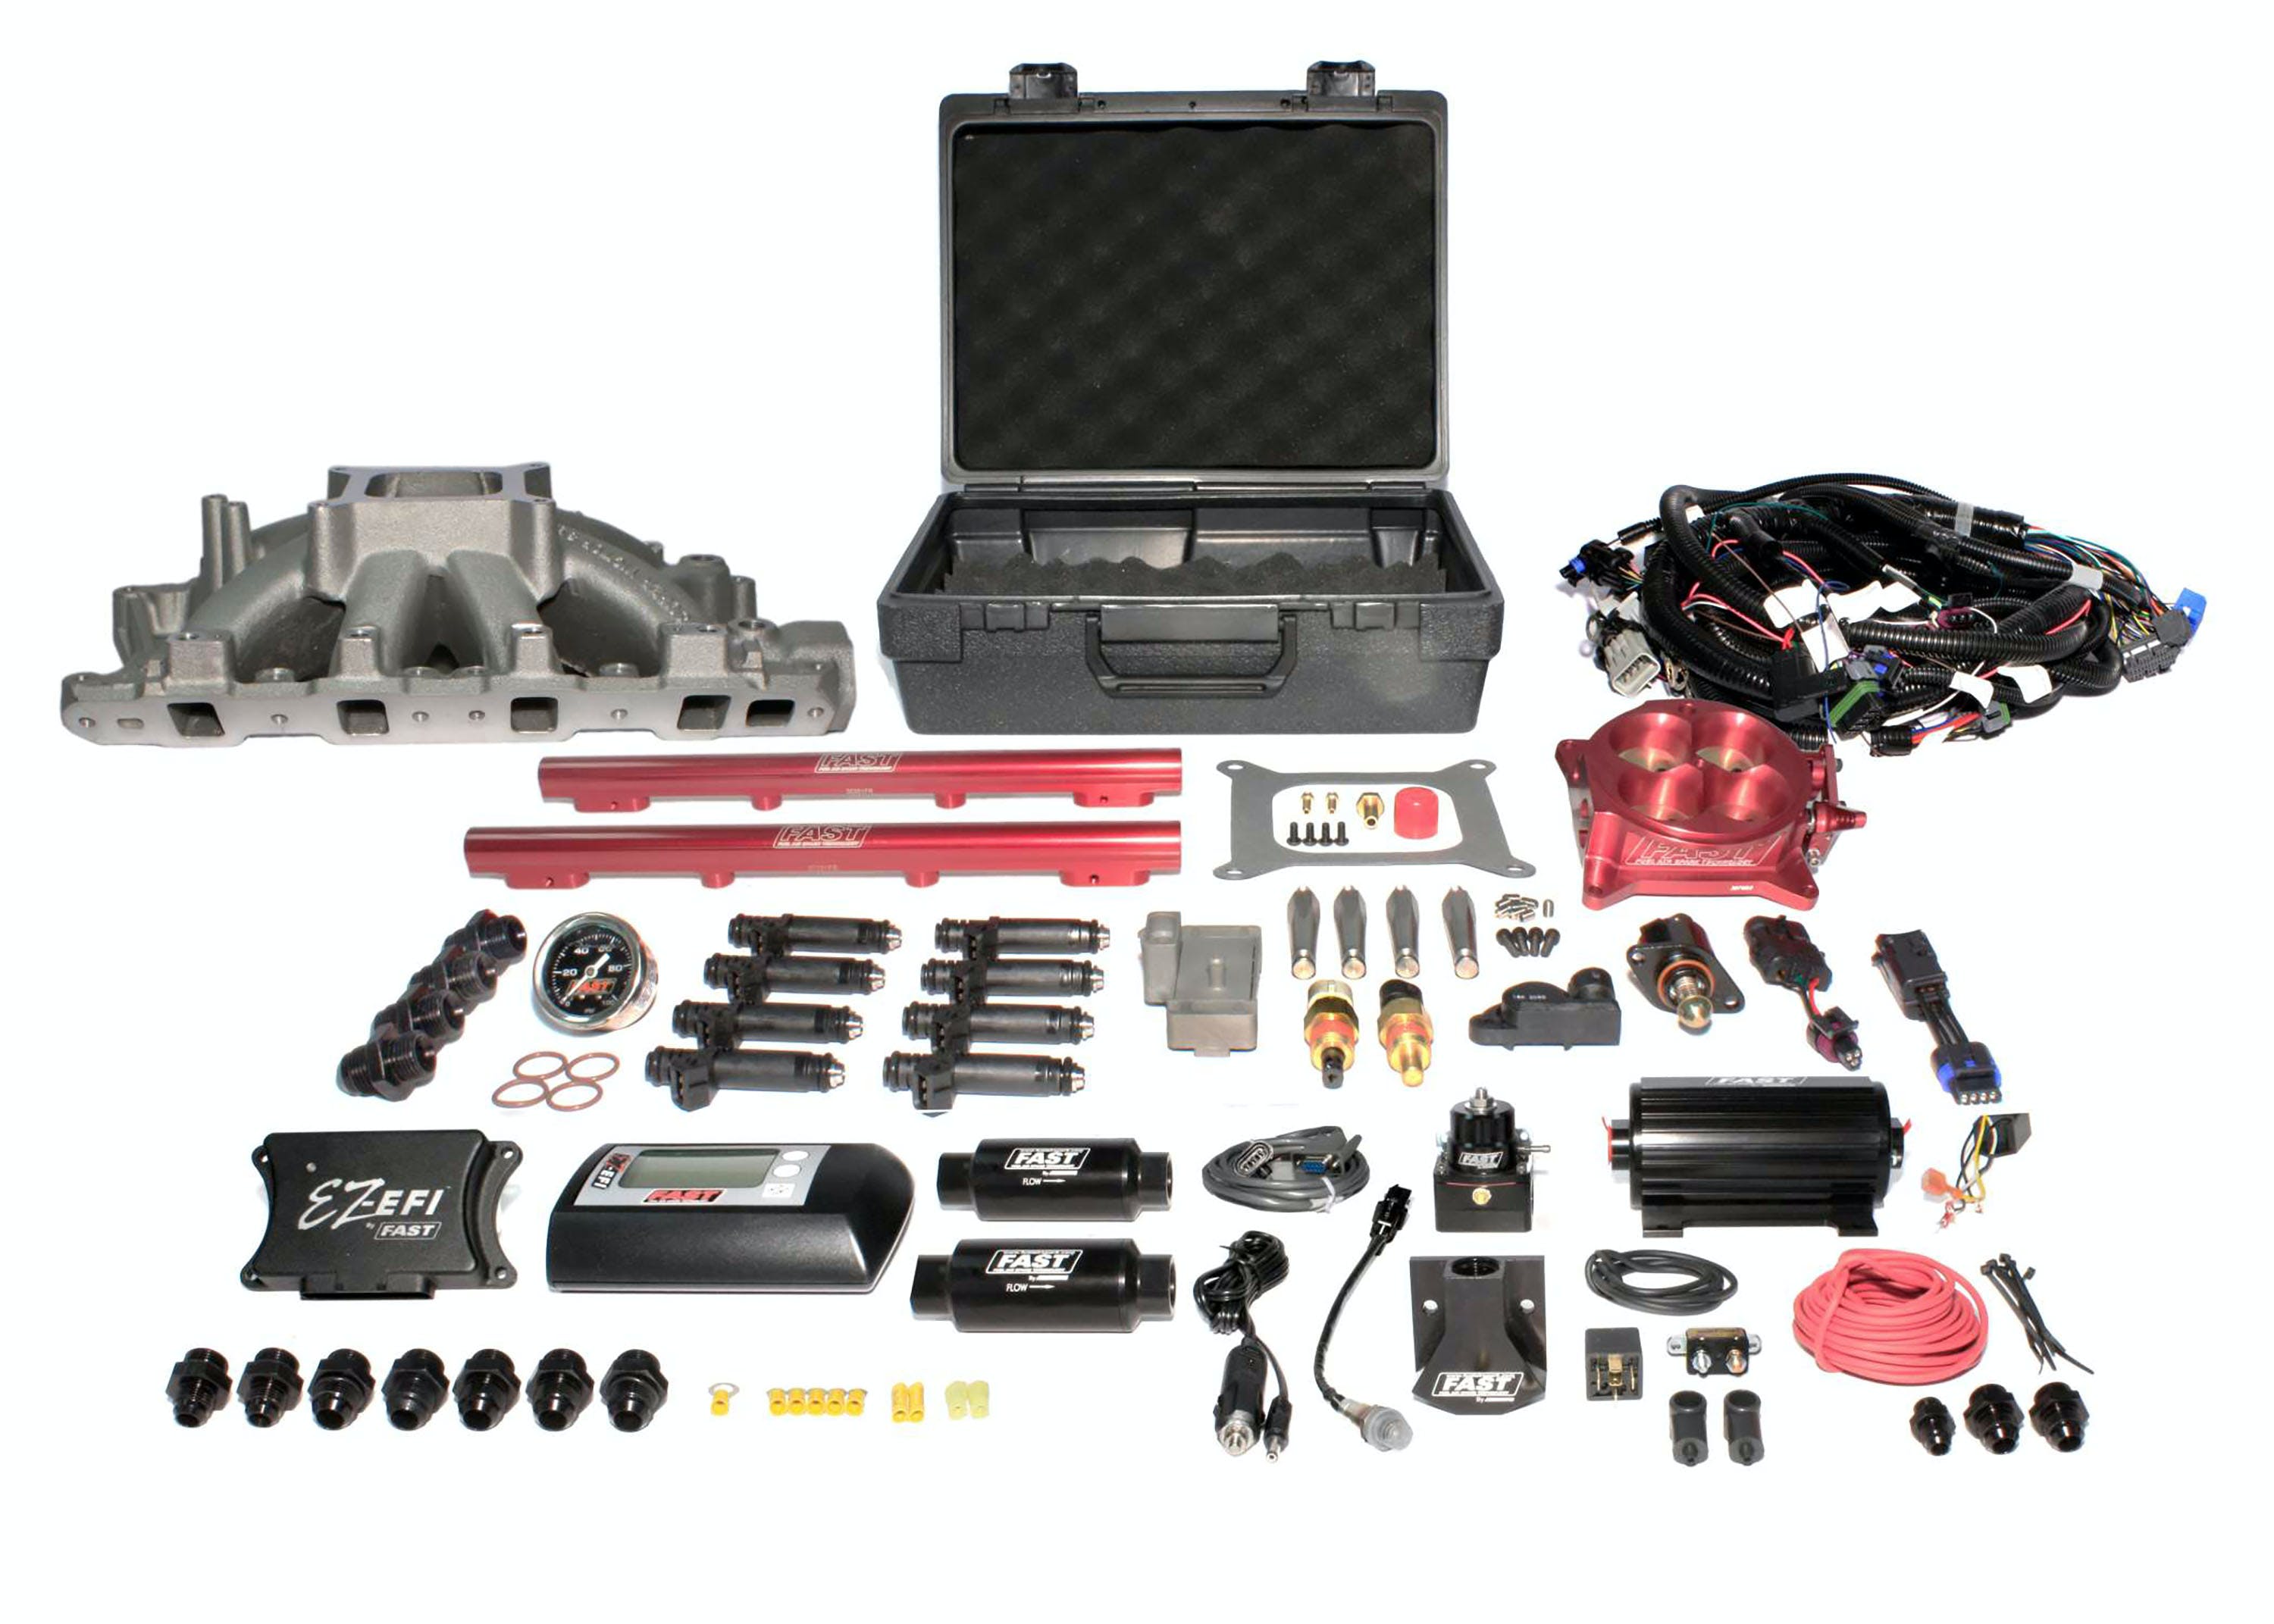 FAST - Fuel Air Spark Technology 3031302-05E EZ EFI SBF Multiport System w/ Intake, Fuel System and Red Throttle Body